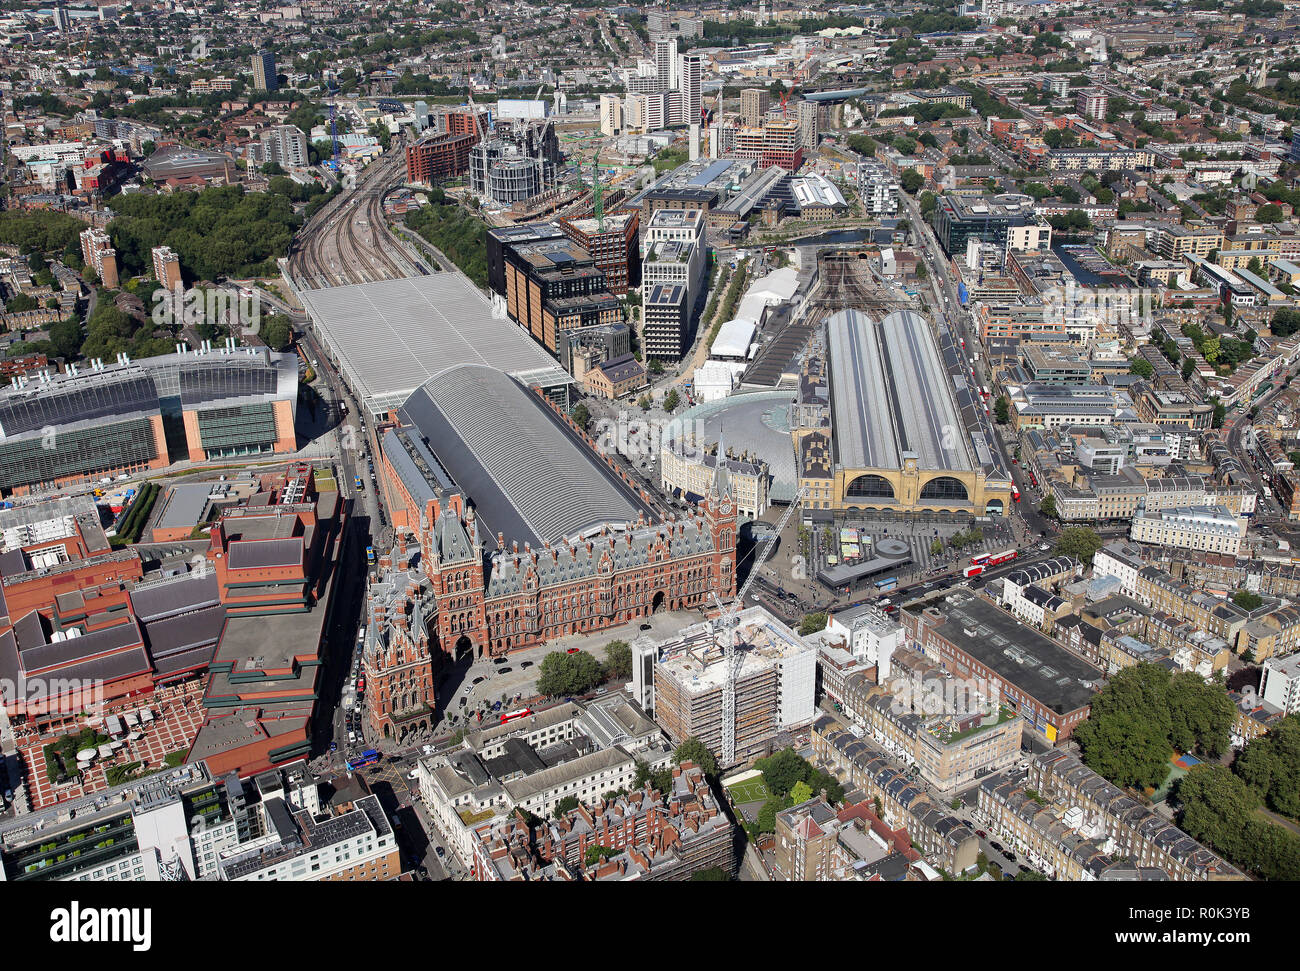 London St Pancras and Kings cross from the air. Stock Photo